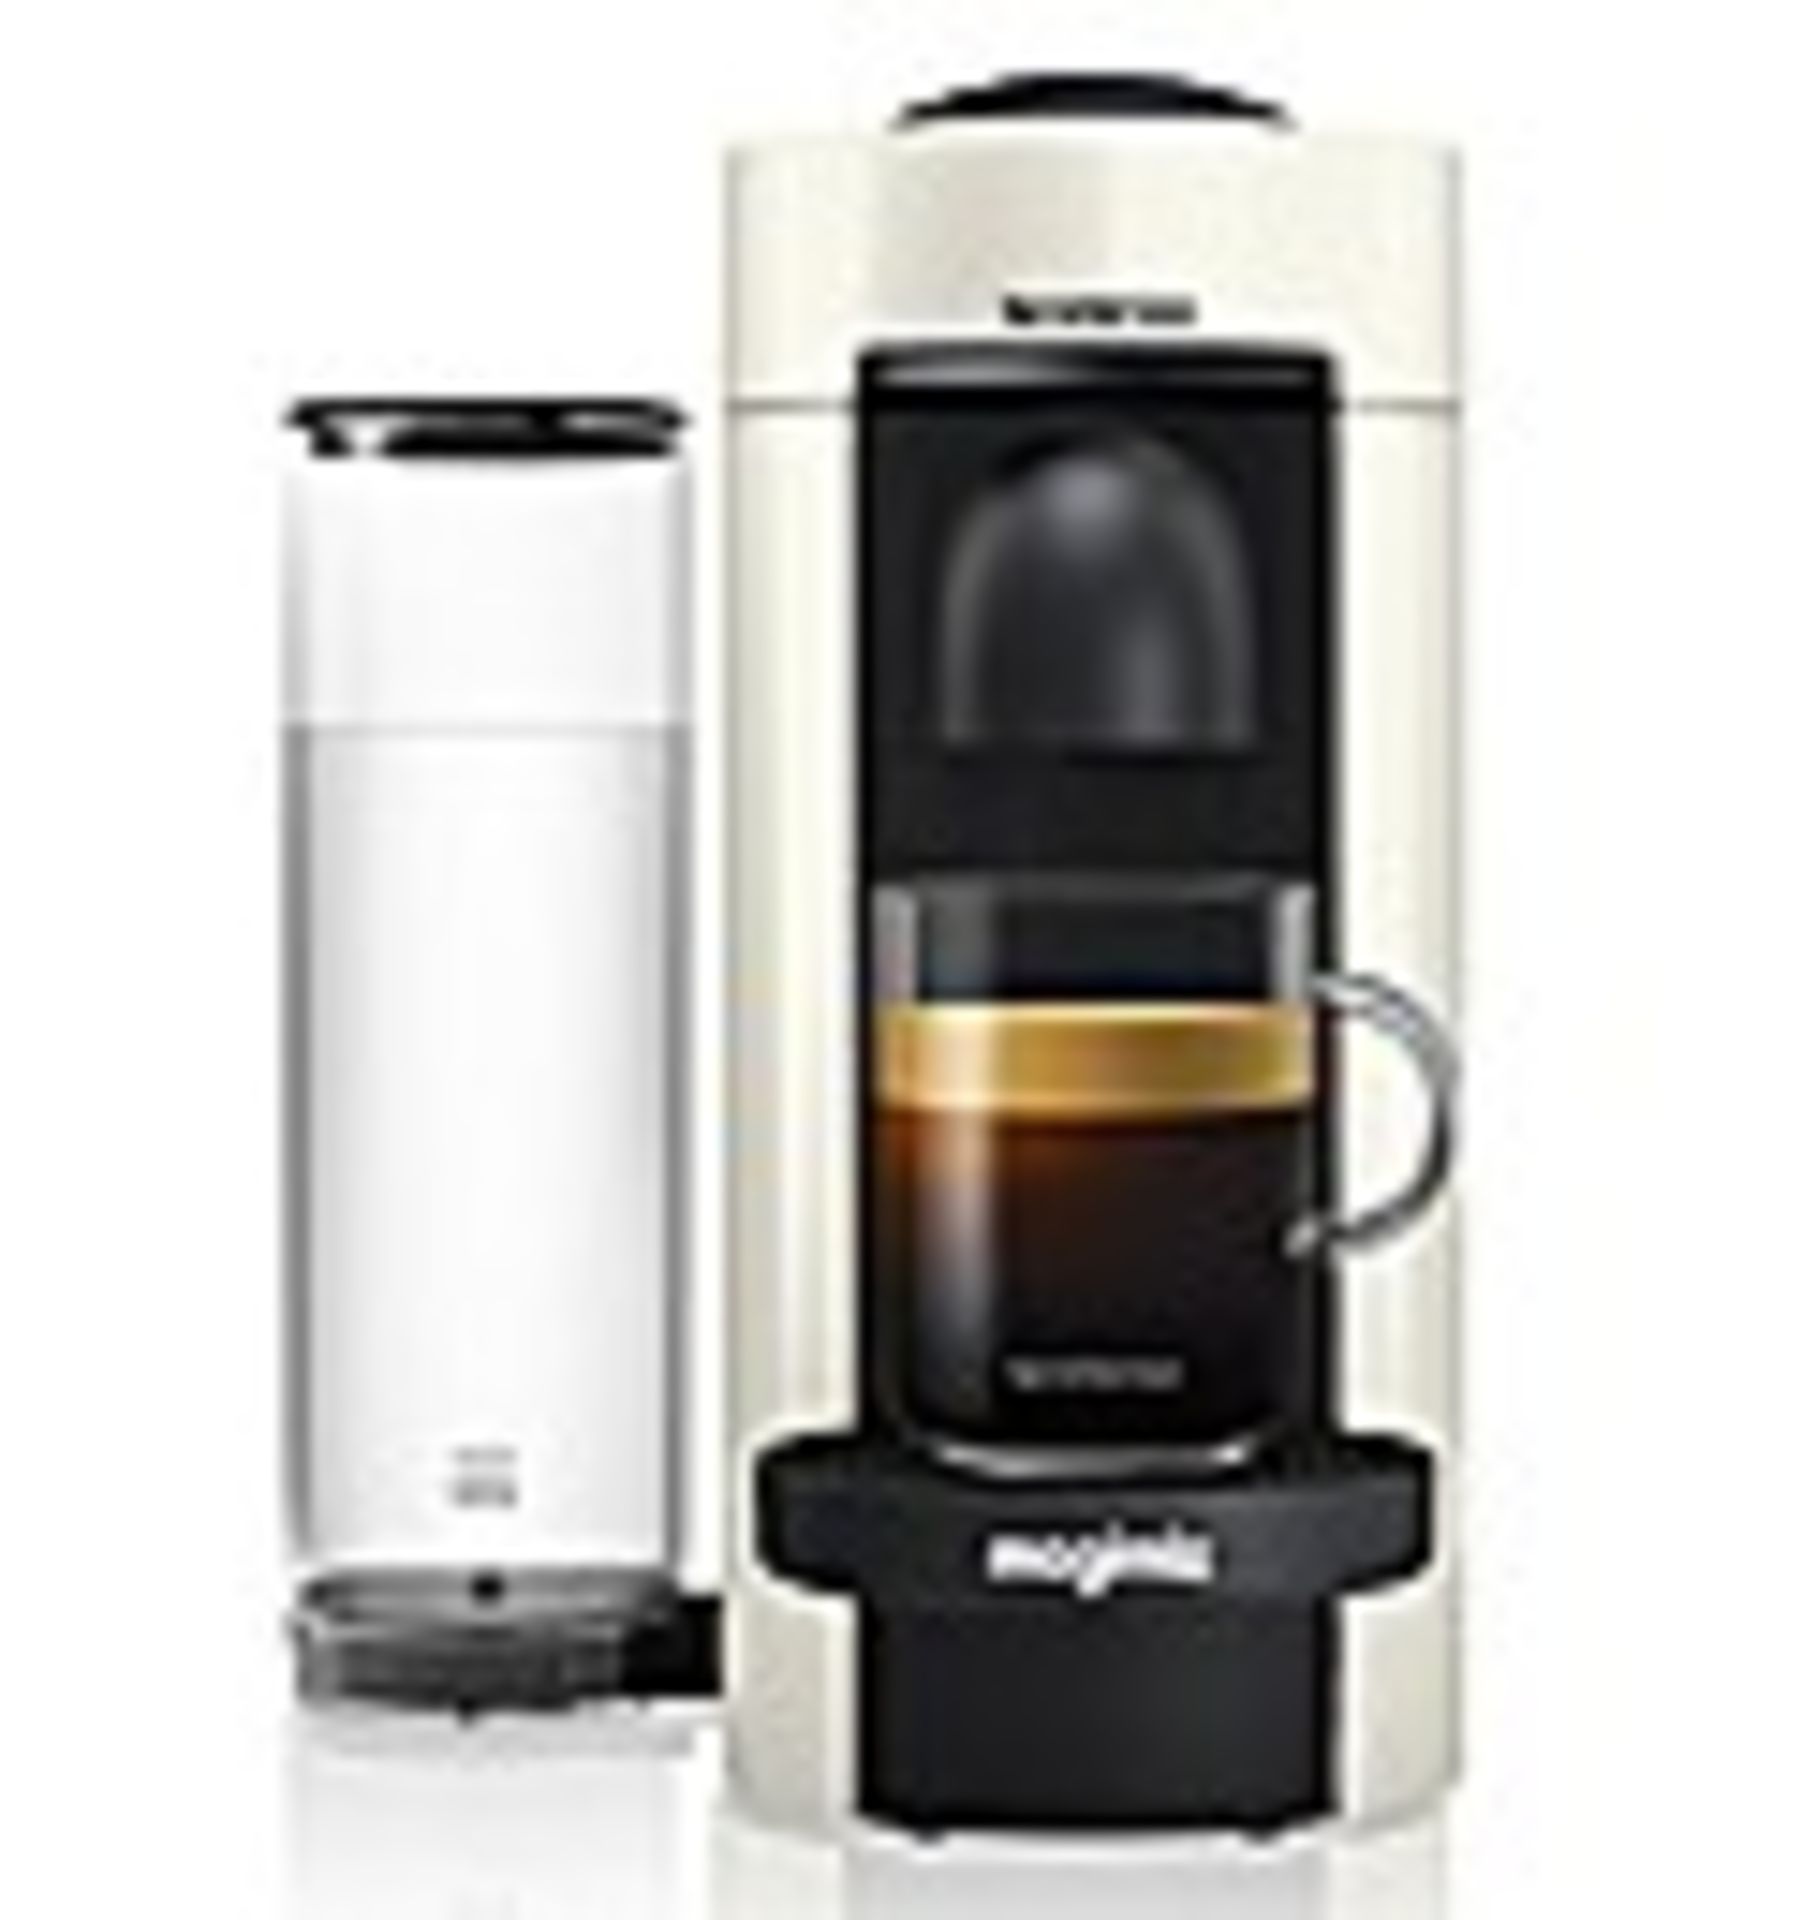 (REF117870) Nespresso Vertuo Plus Limited Edition White Capsule Coffee Machine by Magimix RRP £